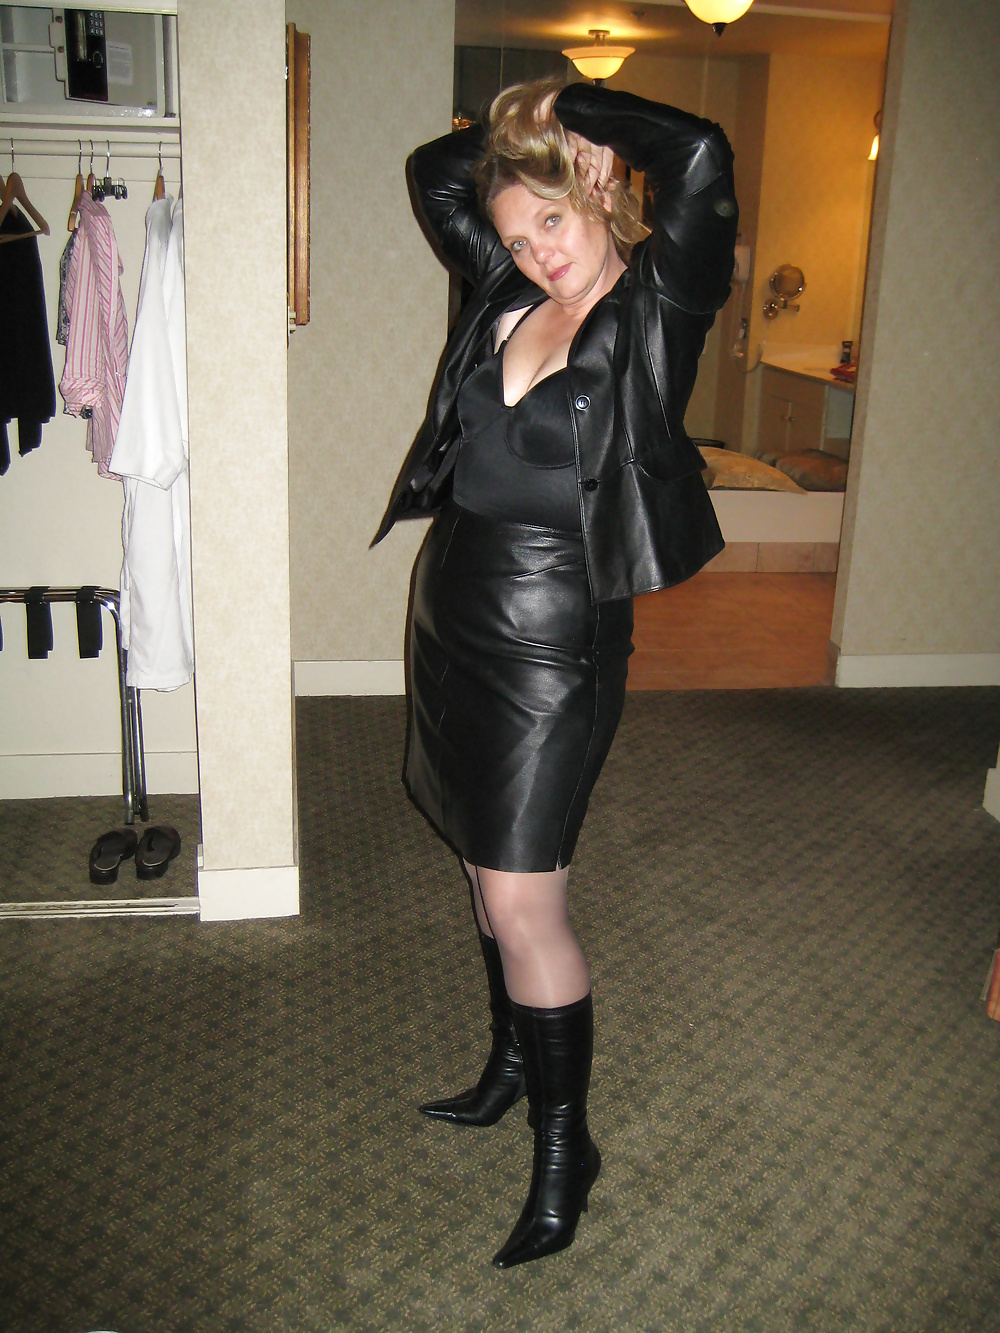 Cougar in Leather Skirt #34892997